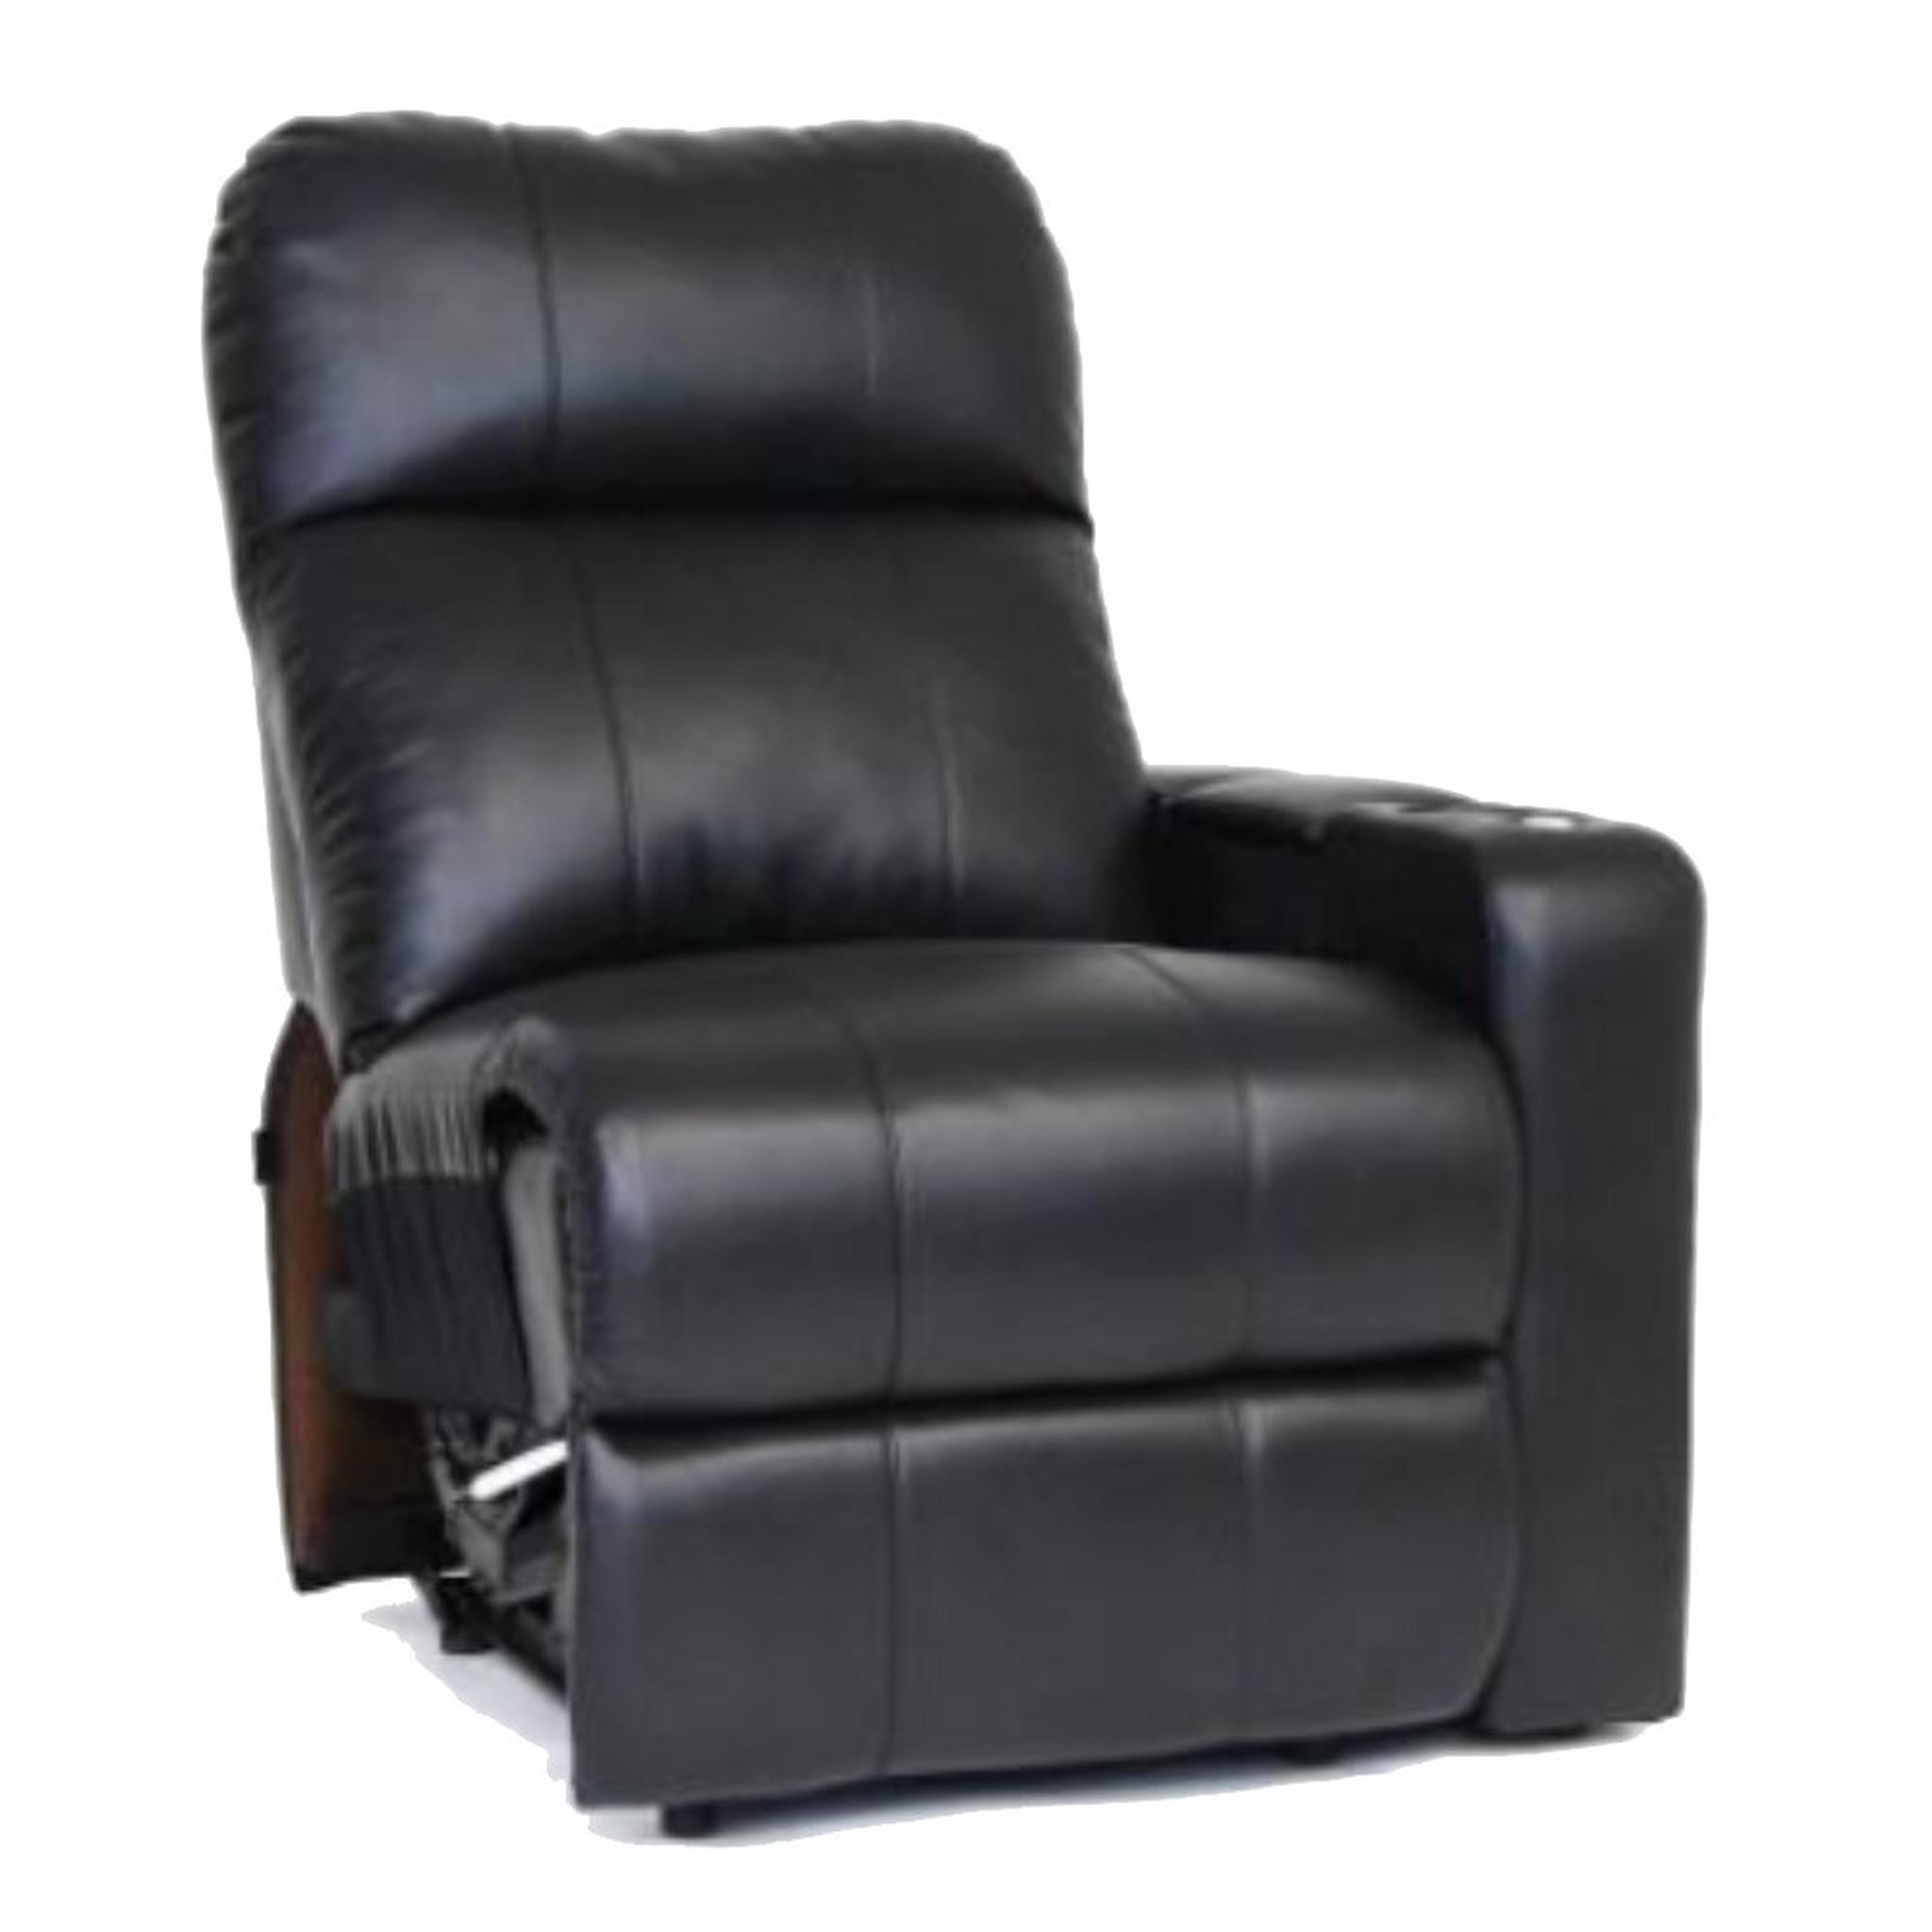 Octane Seating Charger Leather Home Theater Recliner Black (One arm rest)